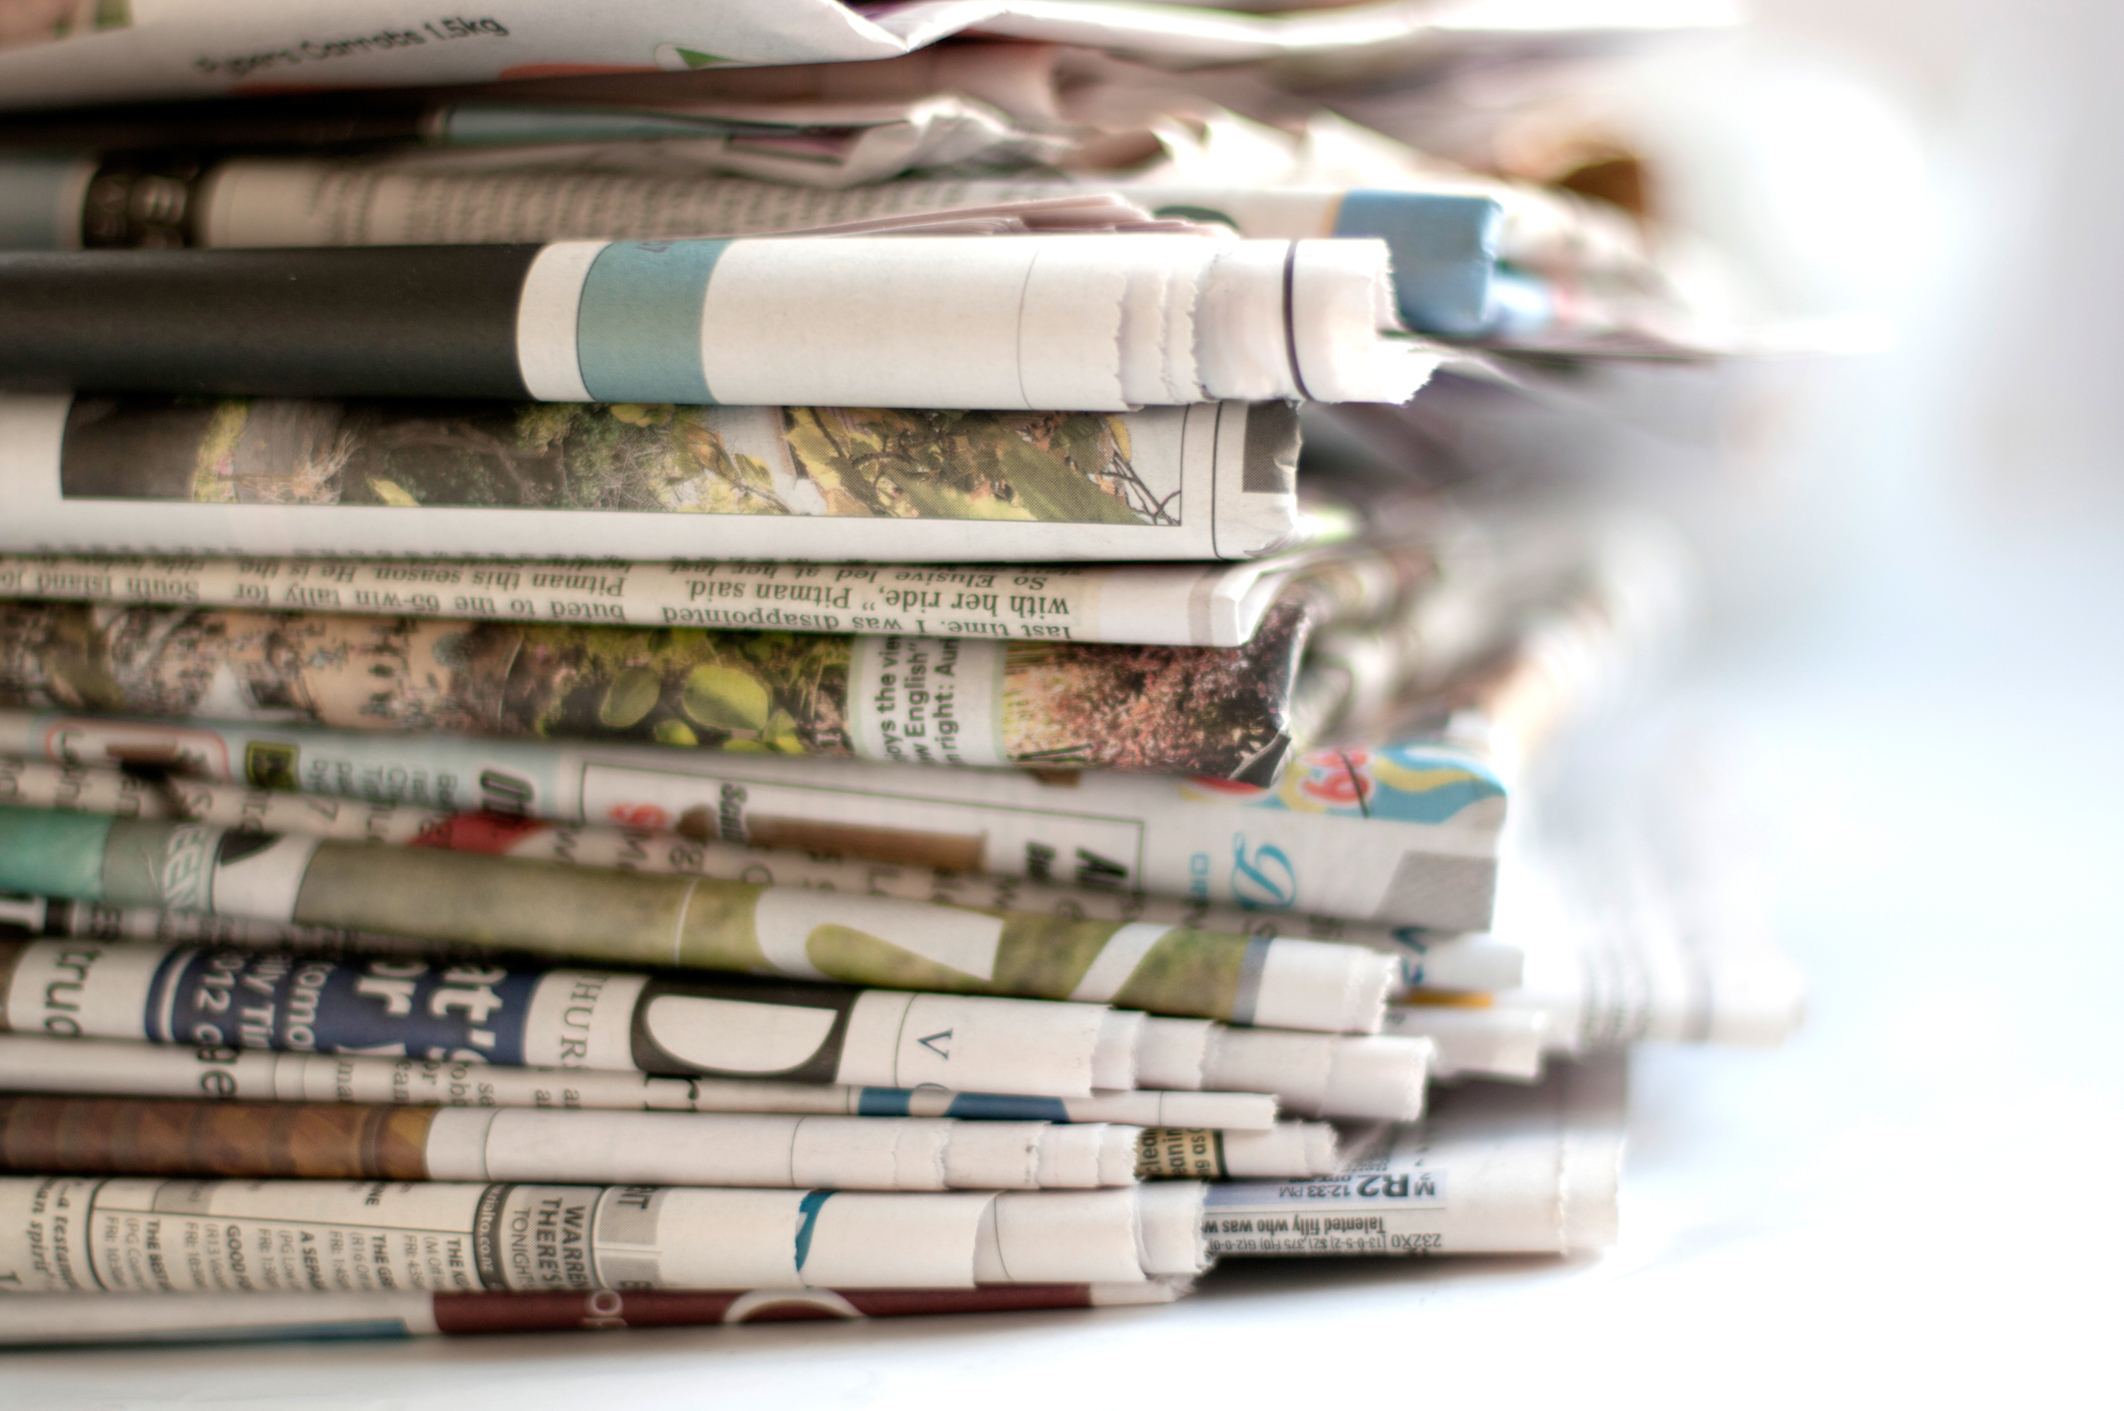 A close-up of a stack of folded newspapers, possibly indicating a collection of recent or significant headlines. No text visible